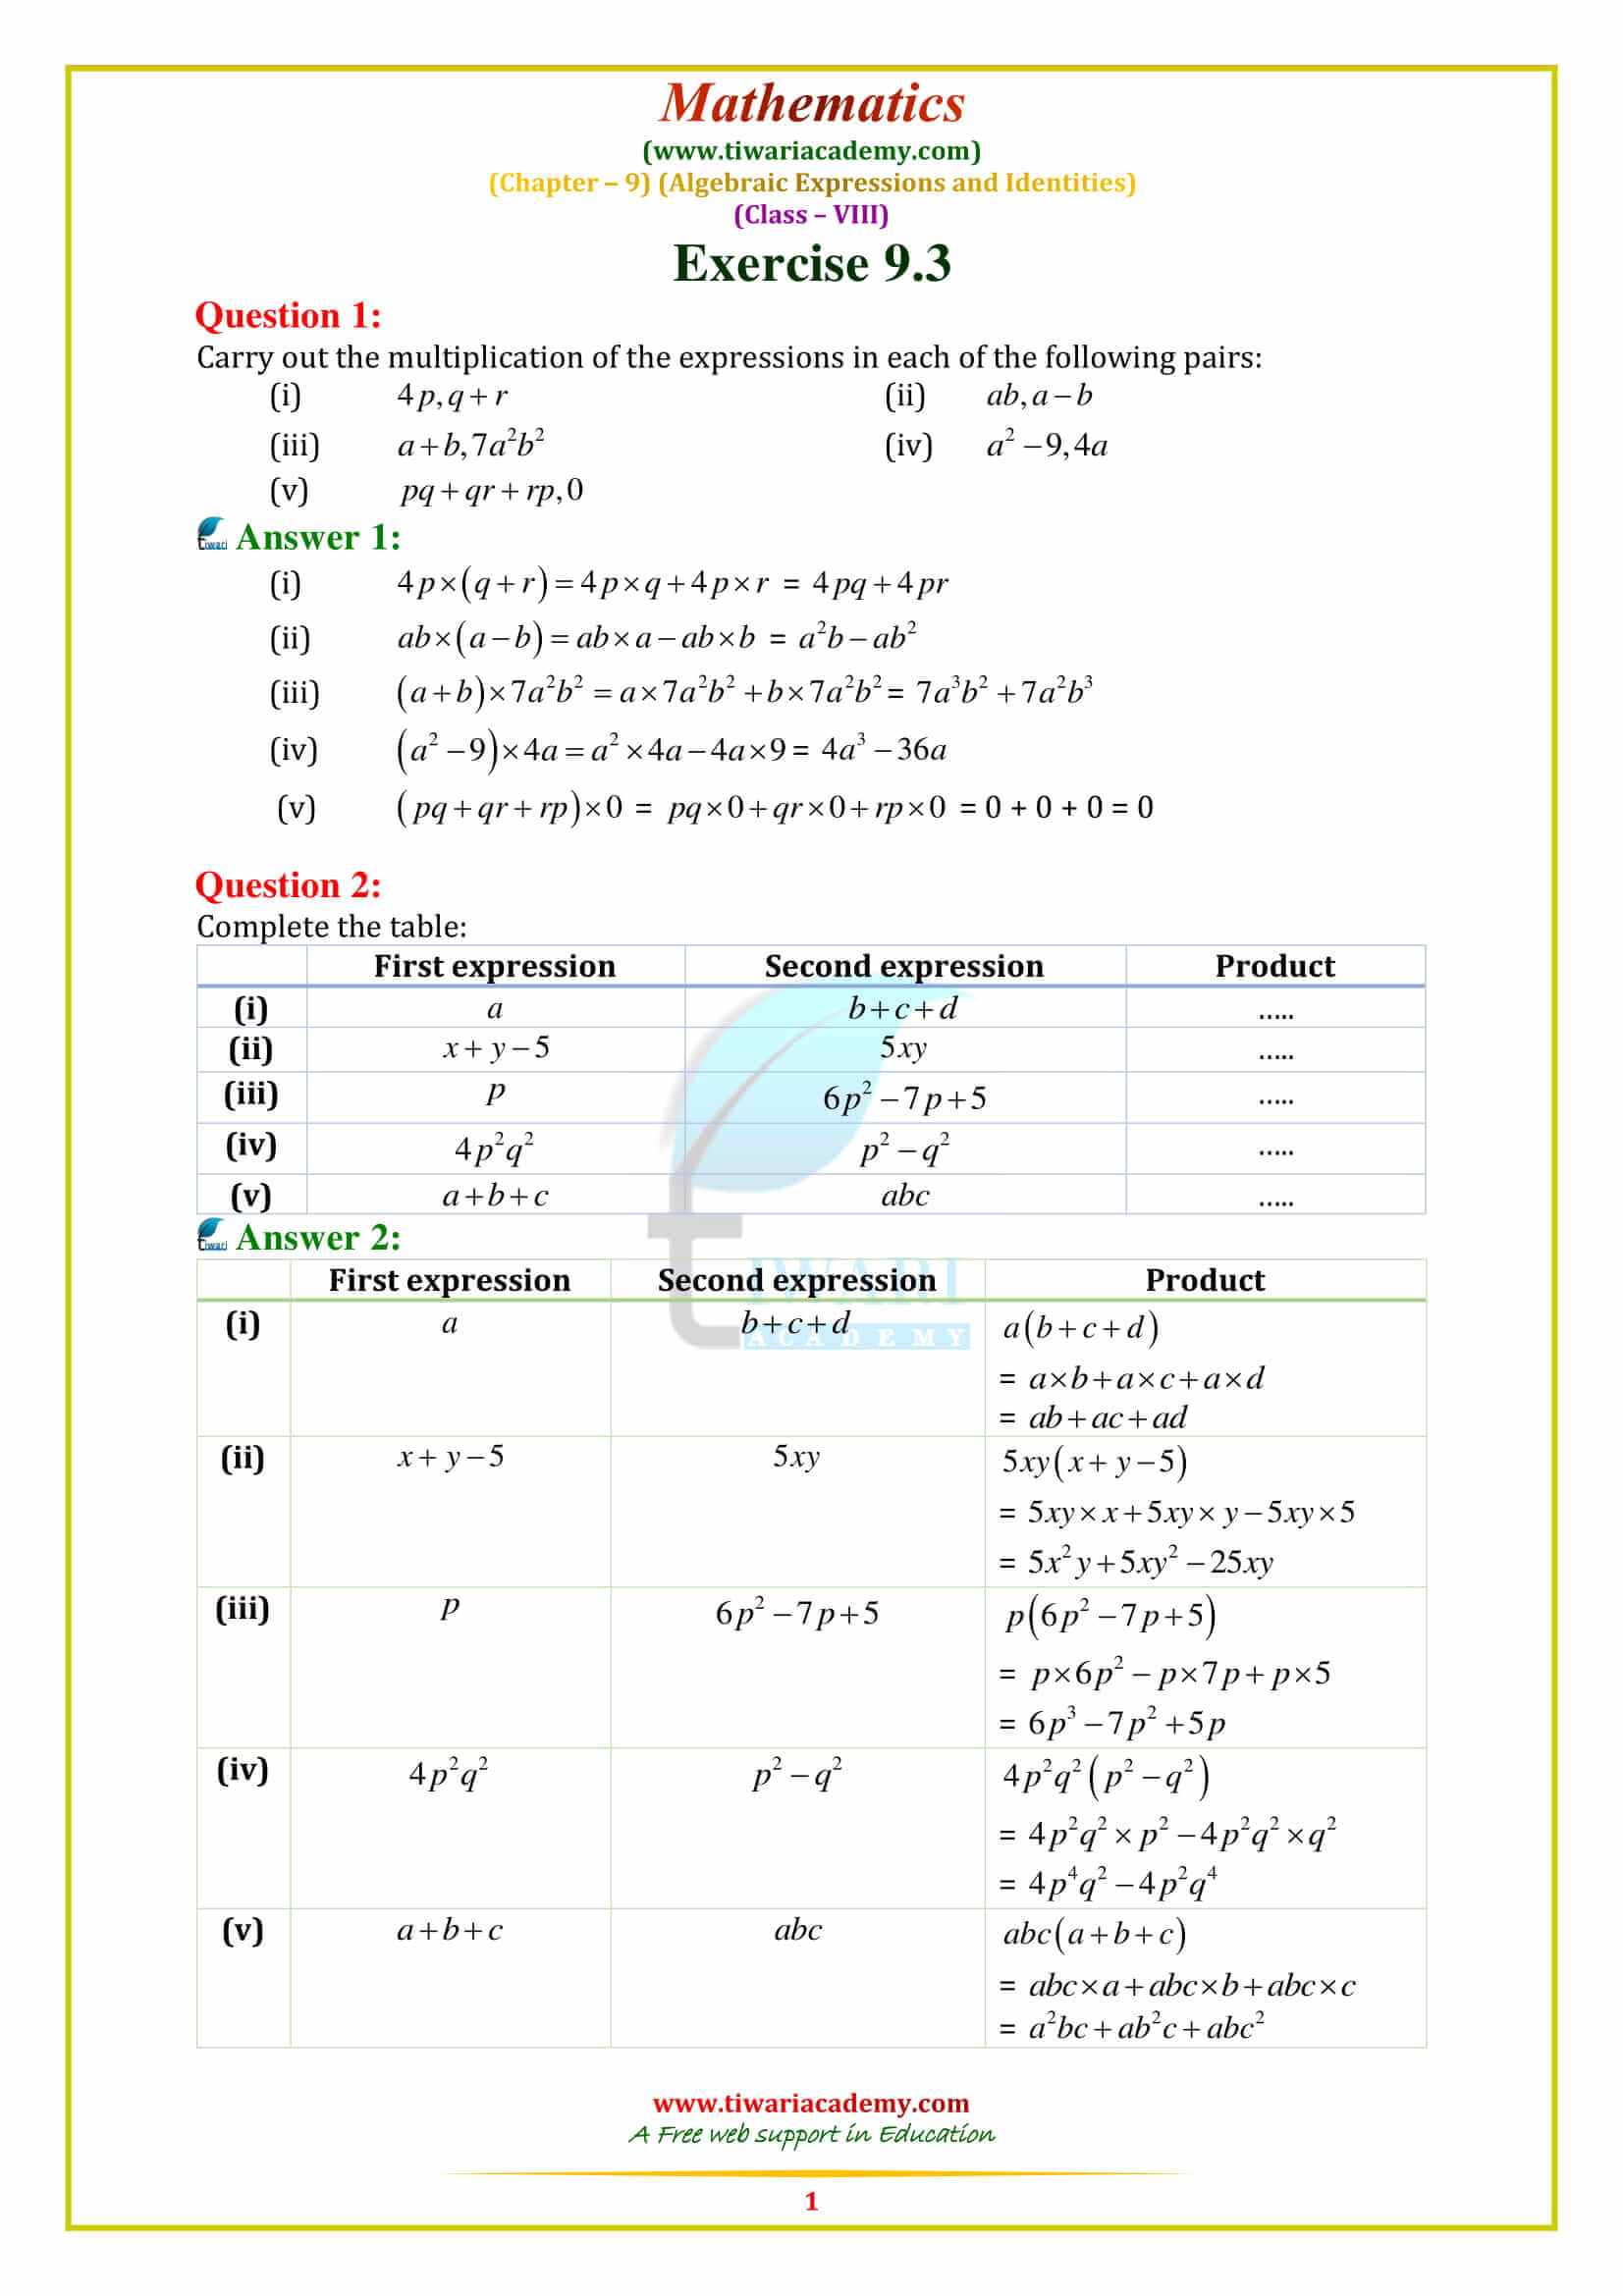 NCERT Solutions for Class 8 Maths Chapter 9 Exercise 9.3 in pdf form